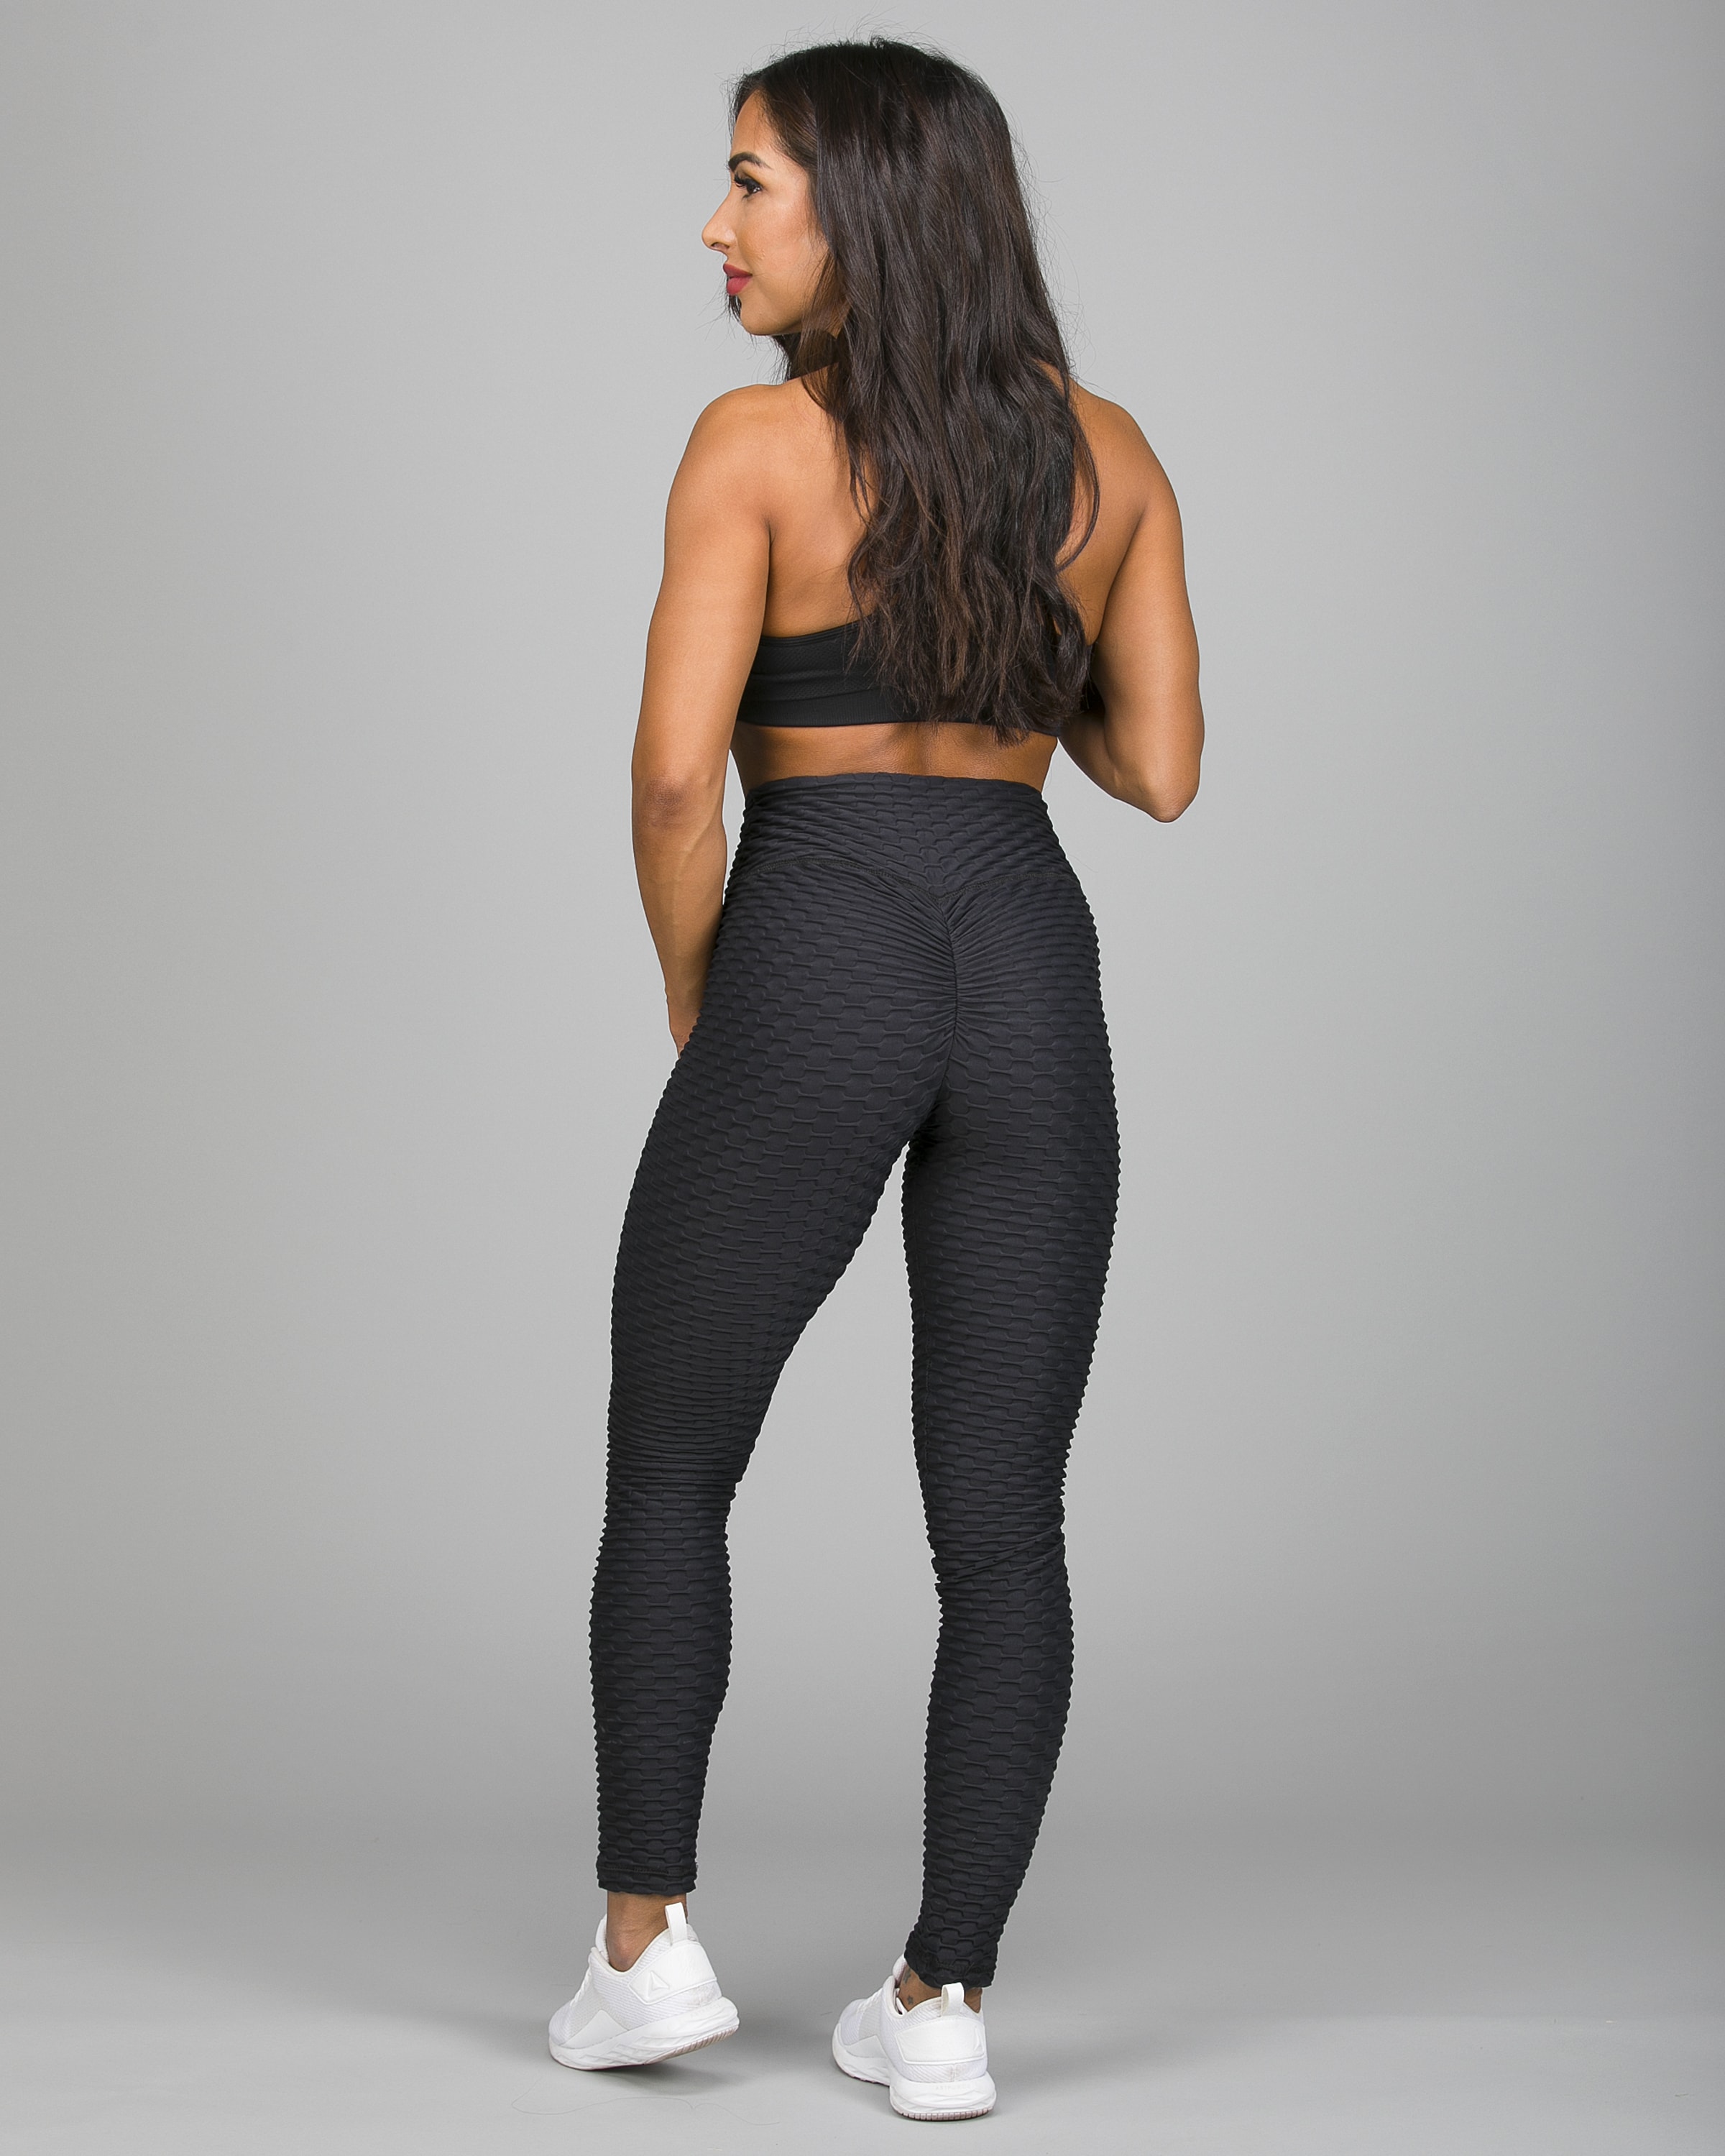 Redqenting High Waisted Leggings for Women Workout India